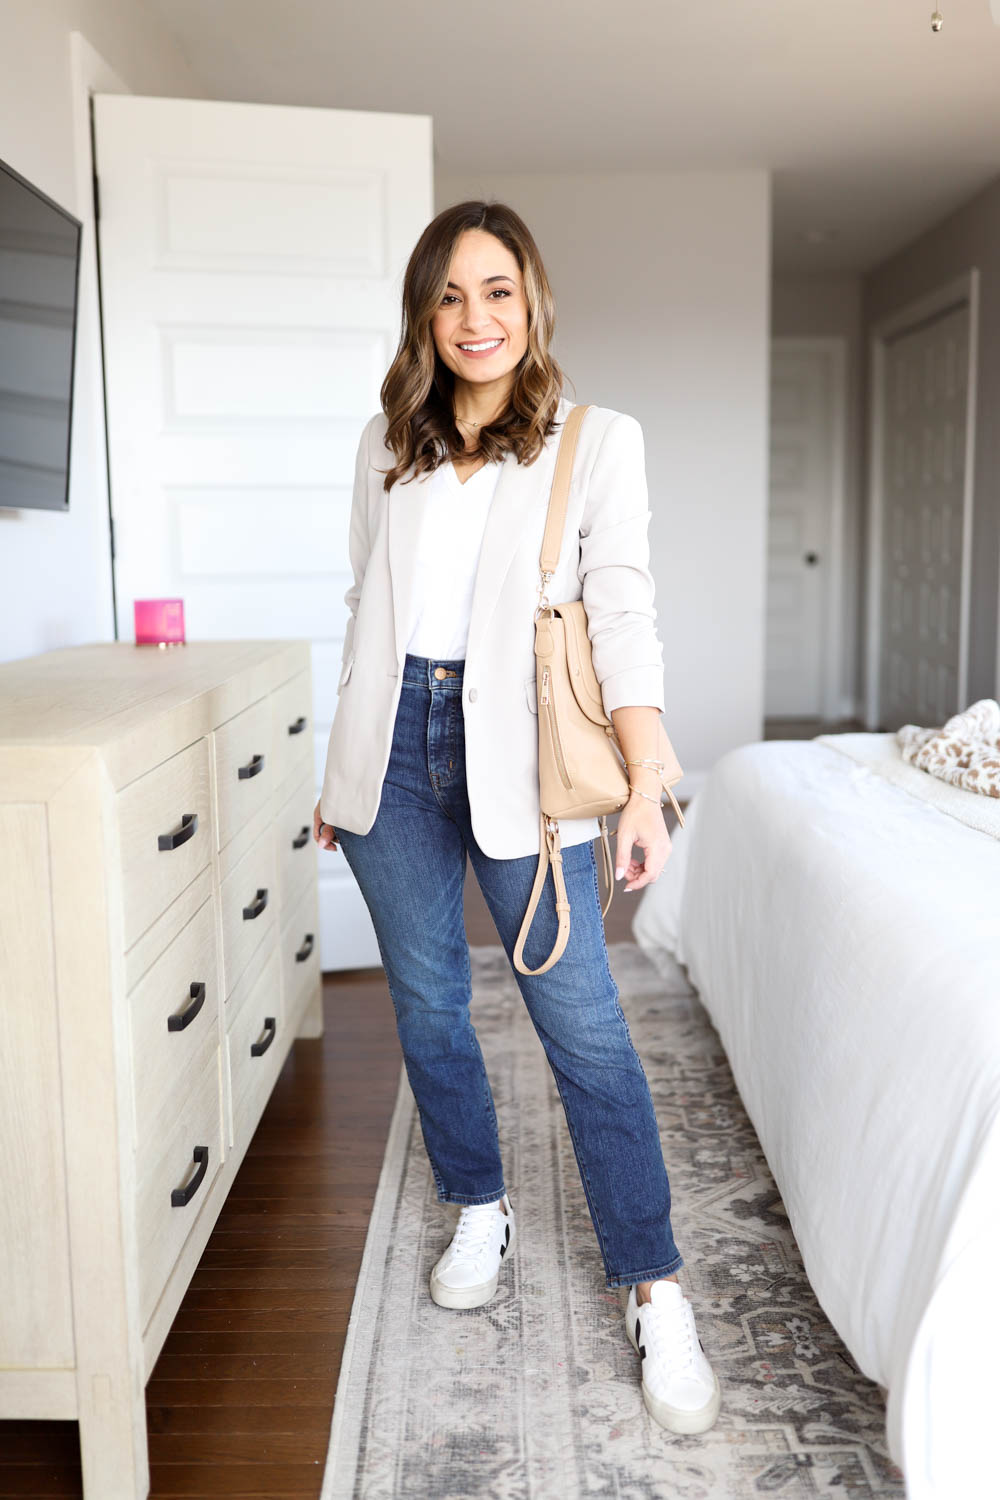 Best Business Casual Jeans Outfits for Women